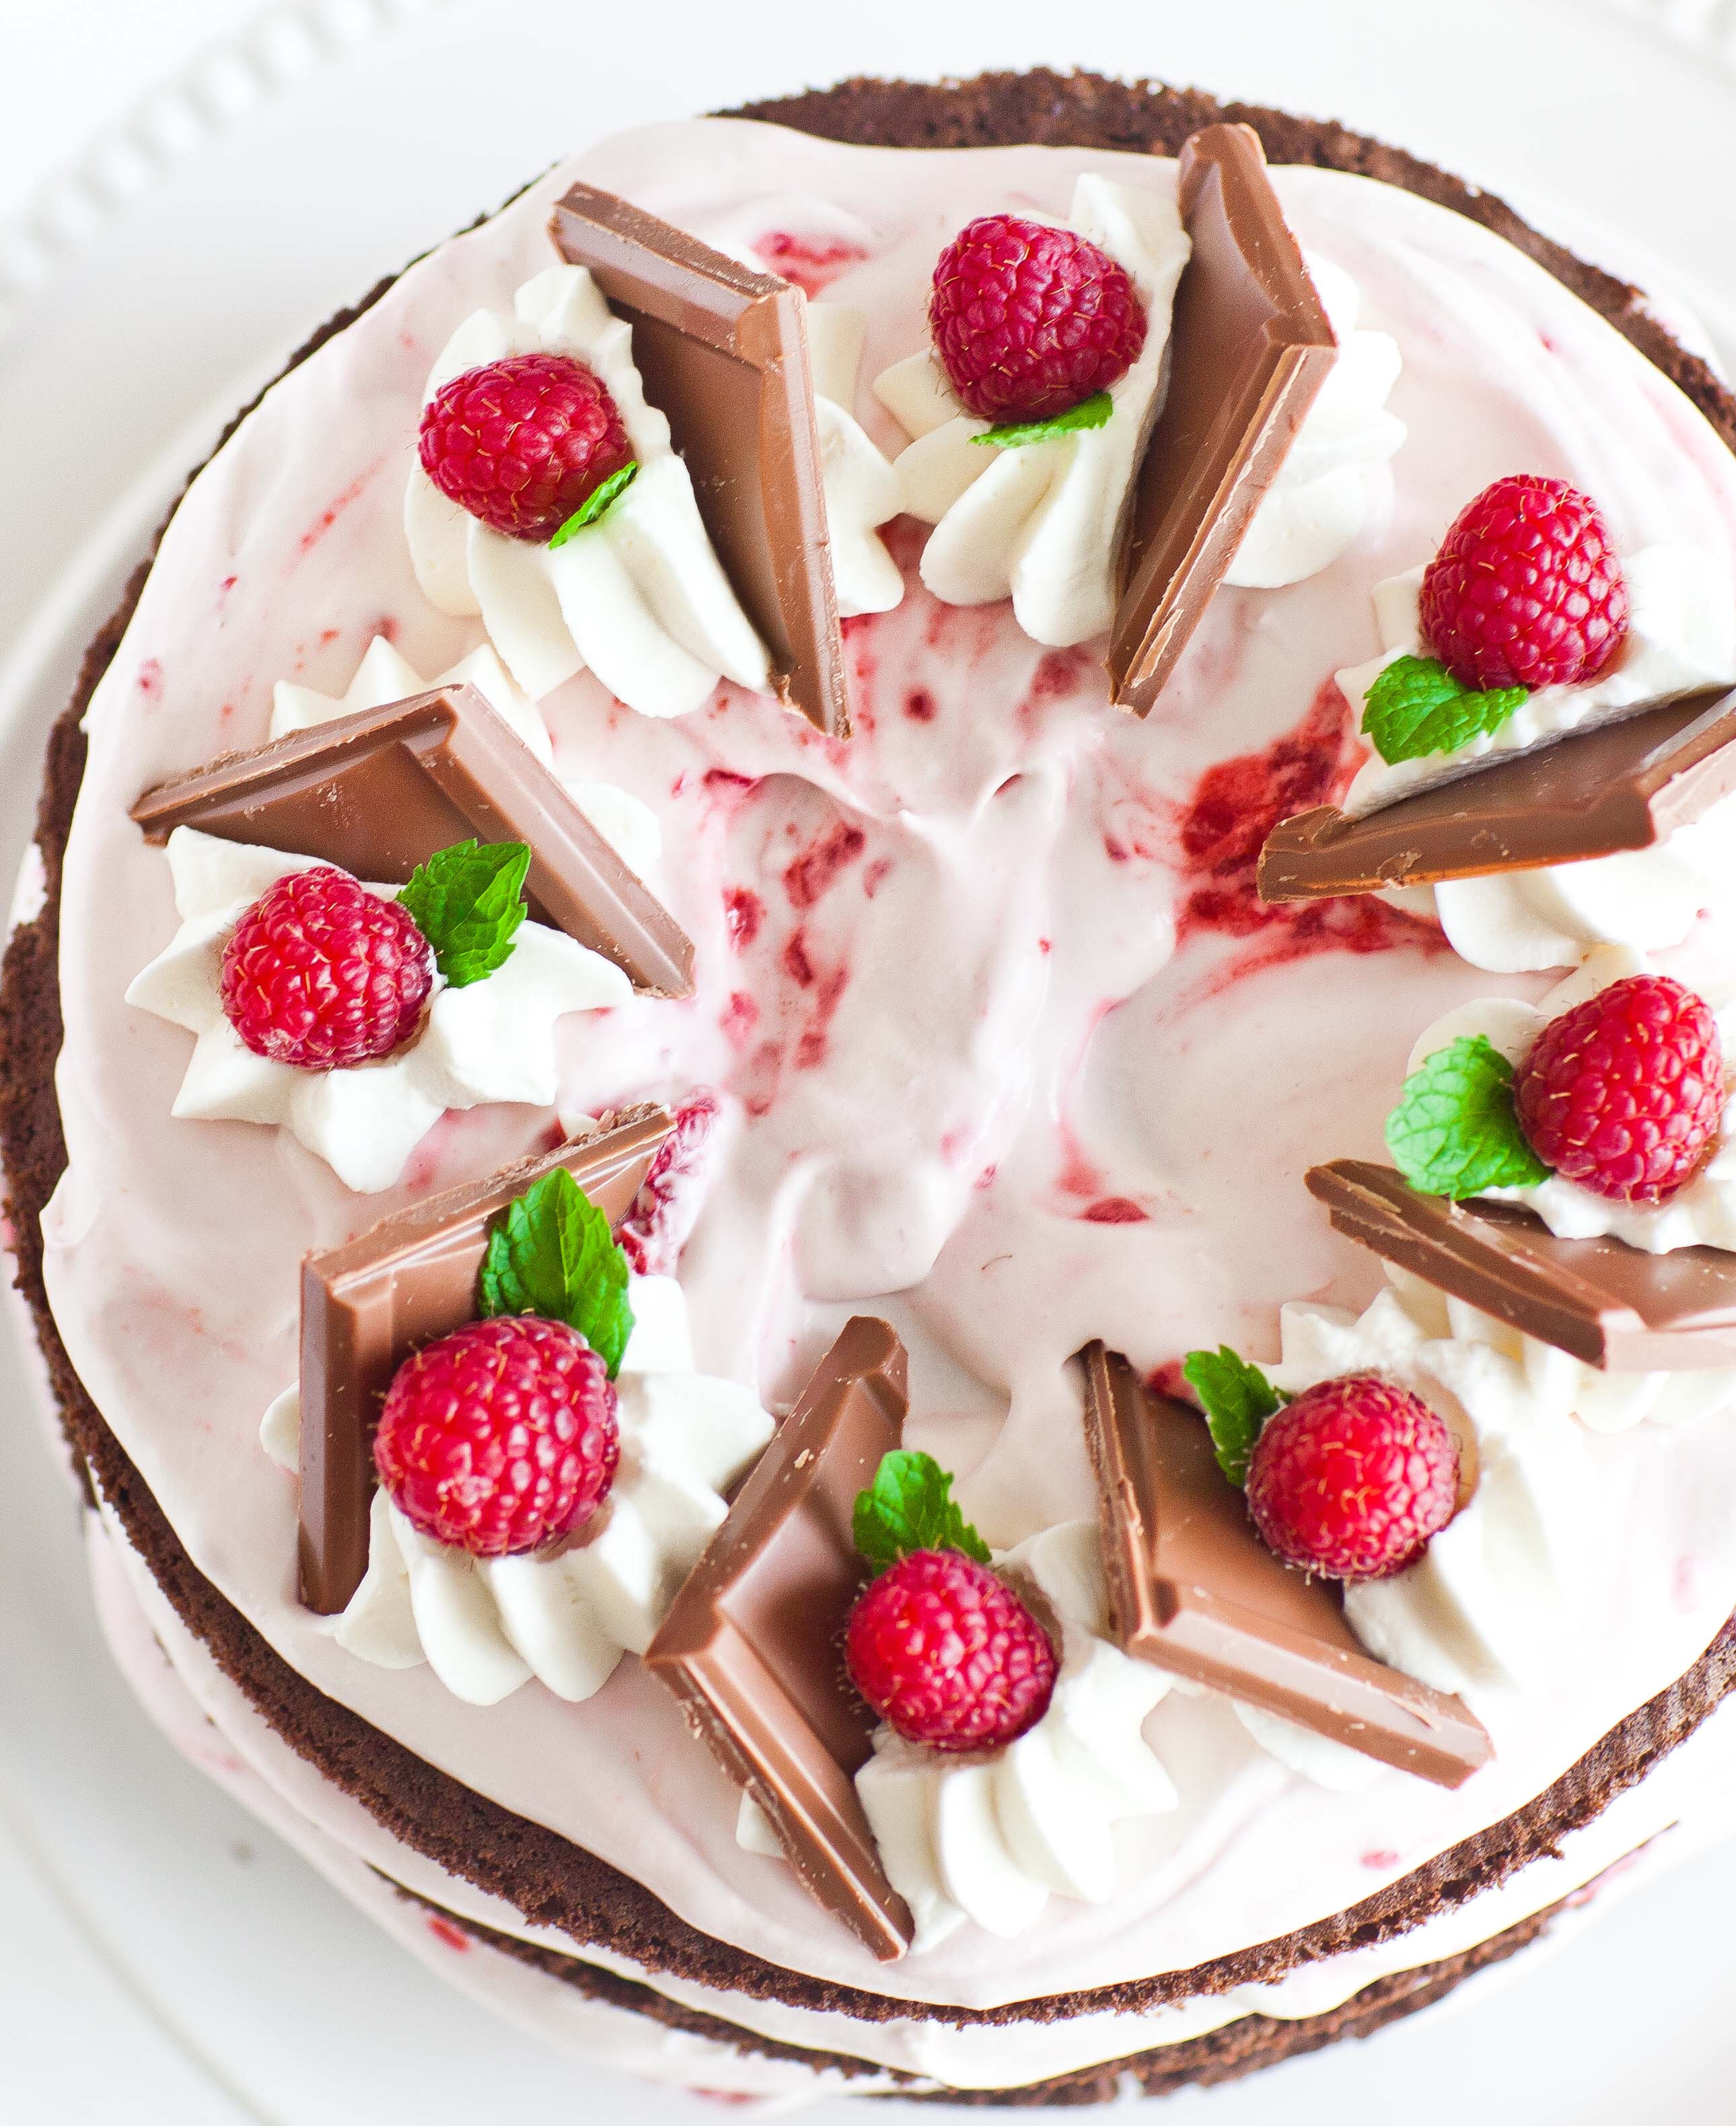 Chocolate Raspberry Cake
 Chocolate Raspberry Cake with Cream Cheese Frosting